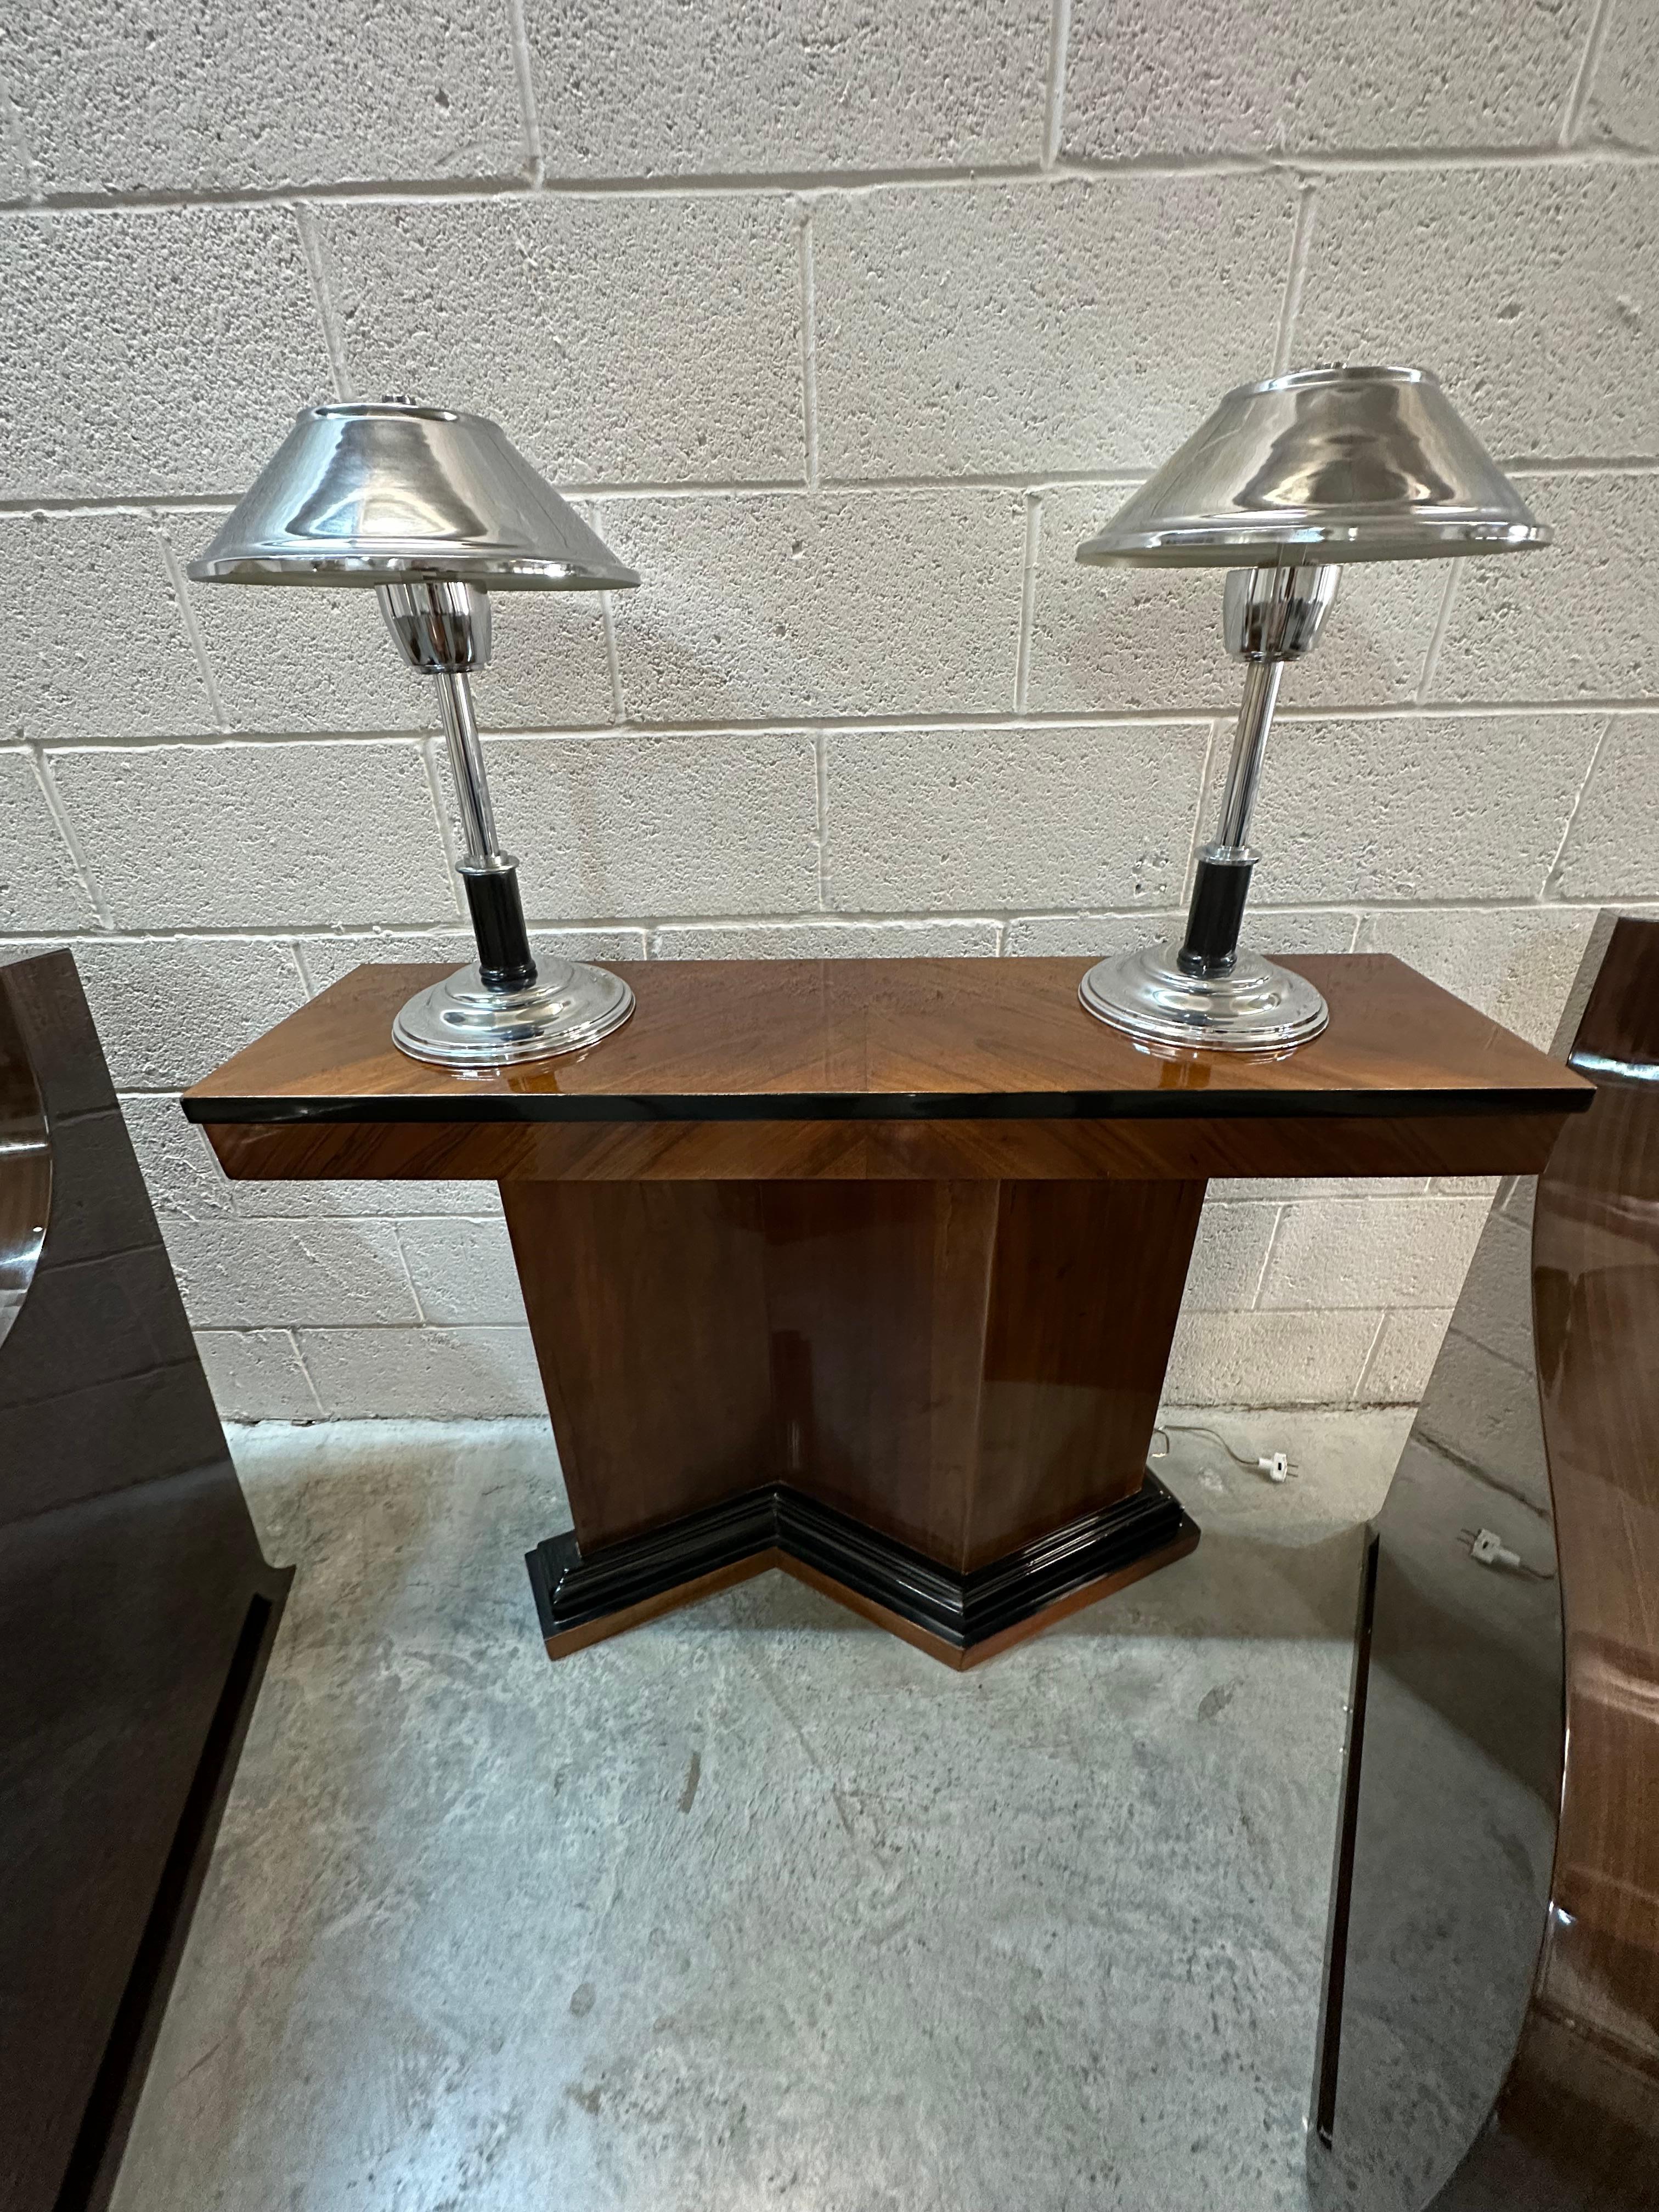 Pair of Art Deco Table Lamp in wood and chrome, 1930 For Sale 2